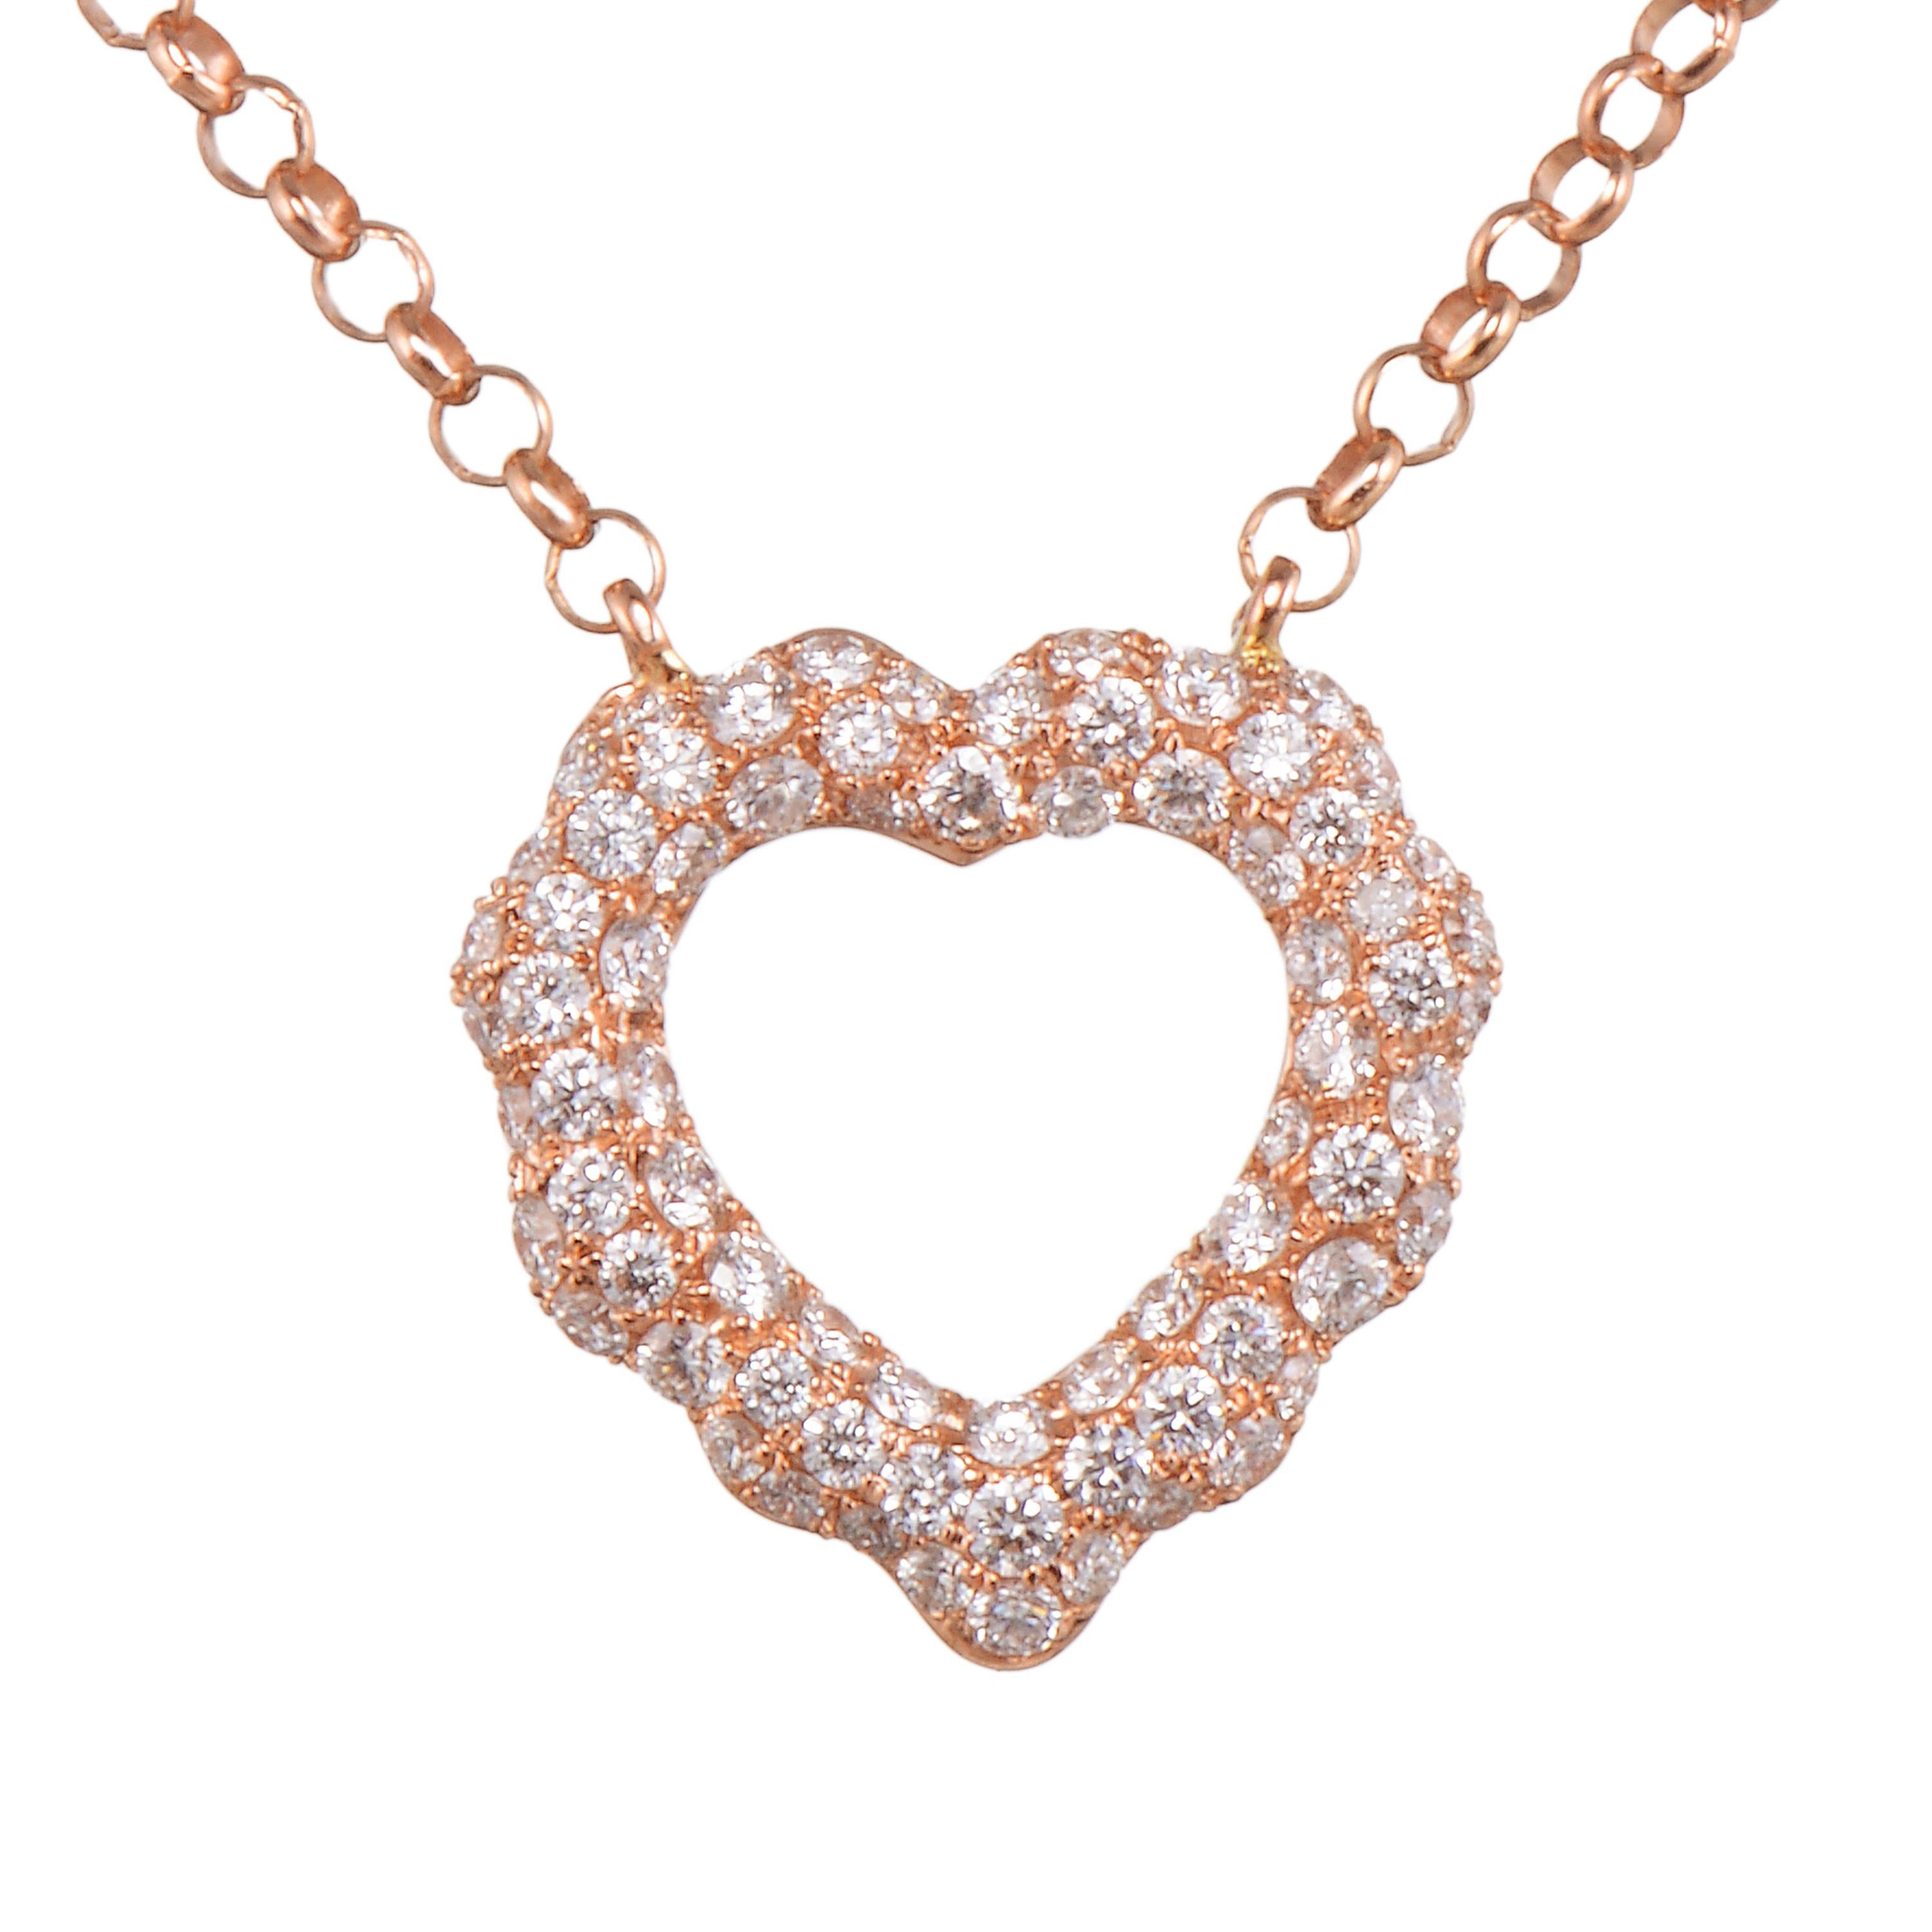 Cast in the shape of the heart, Butani's pendant necklace is handcrafted from 18-karat rose gold and is encrusted with 0.87 carats of sparkling pavé diamonds.  Wear it solo or layered with other pieces.  Chain length 16 inches.

Composition:
18K